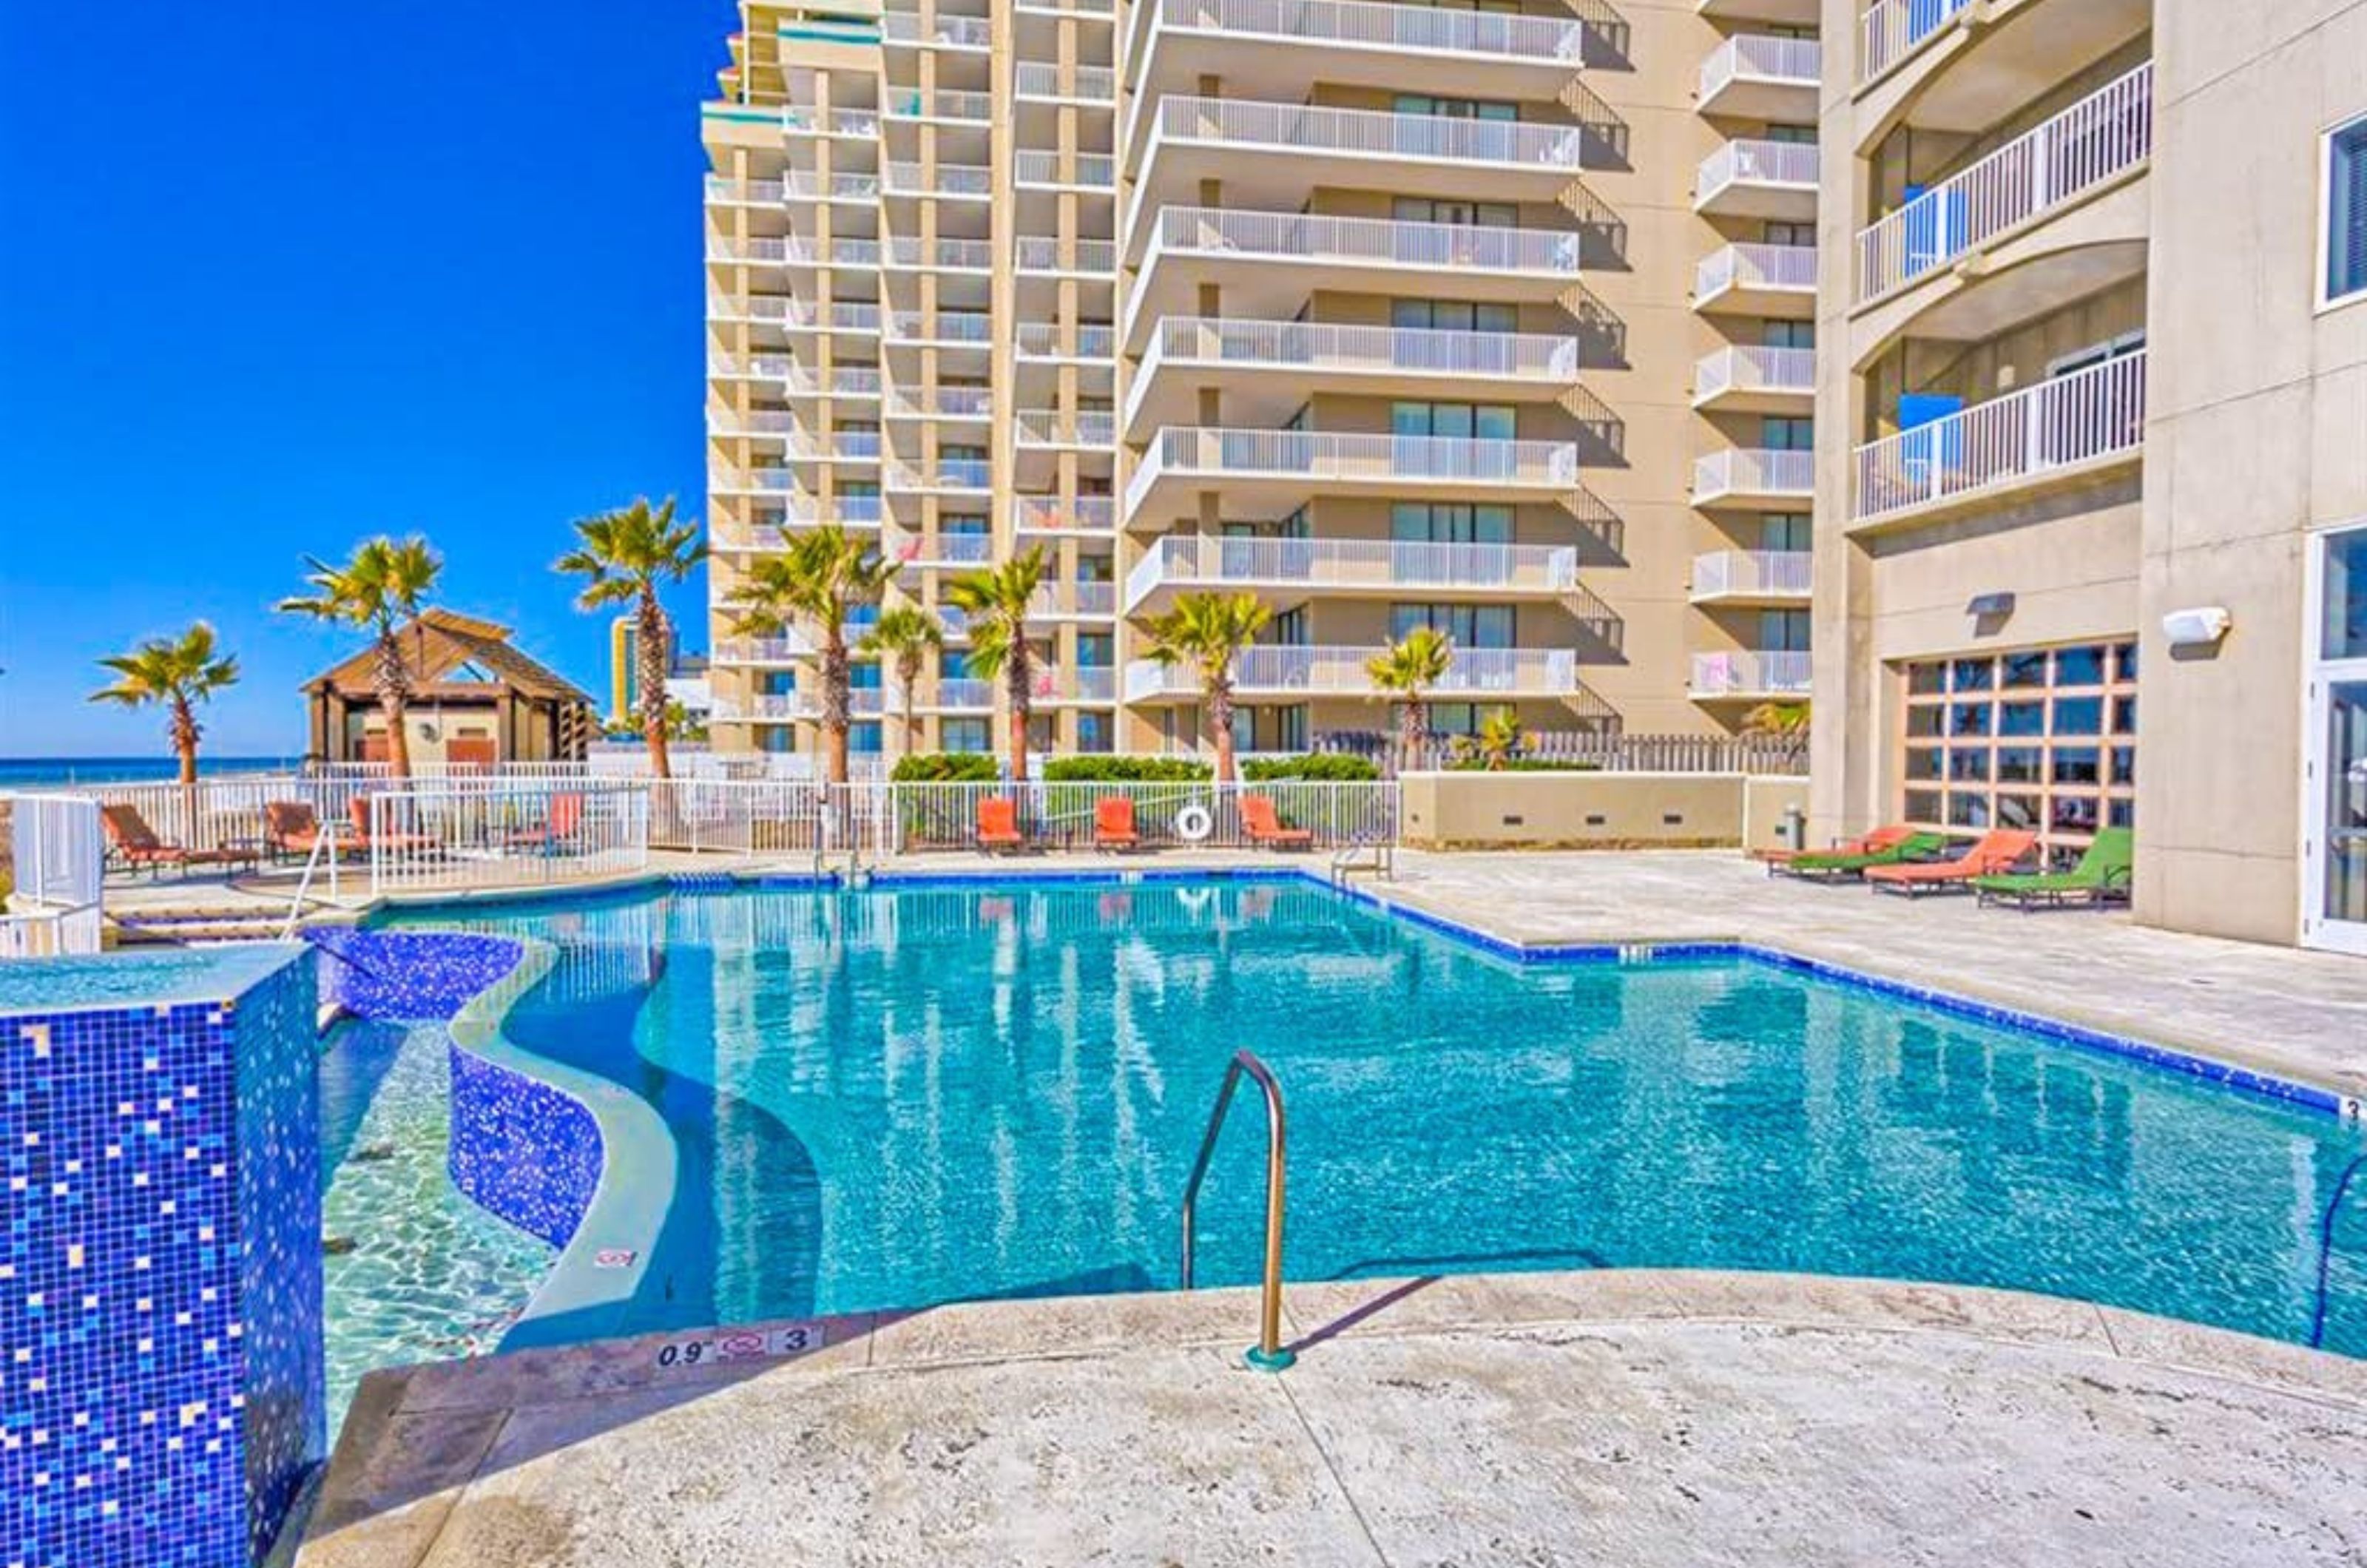 The outdoor swimming pool in front of Escapes to the Shores in Orange Beach Alabama 